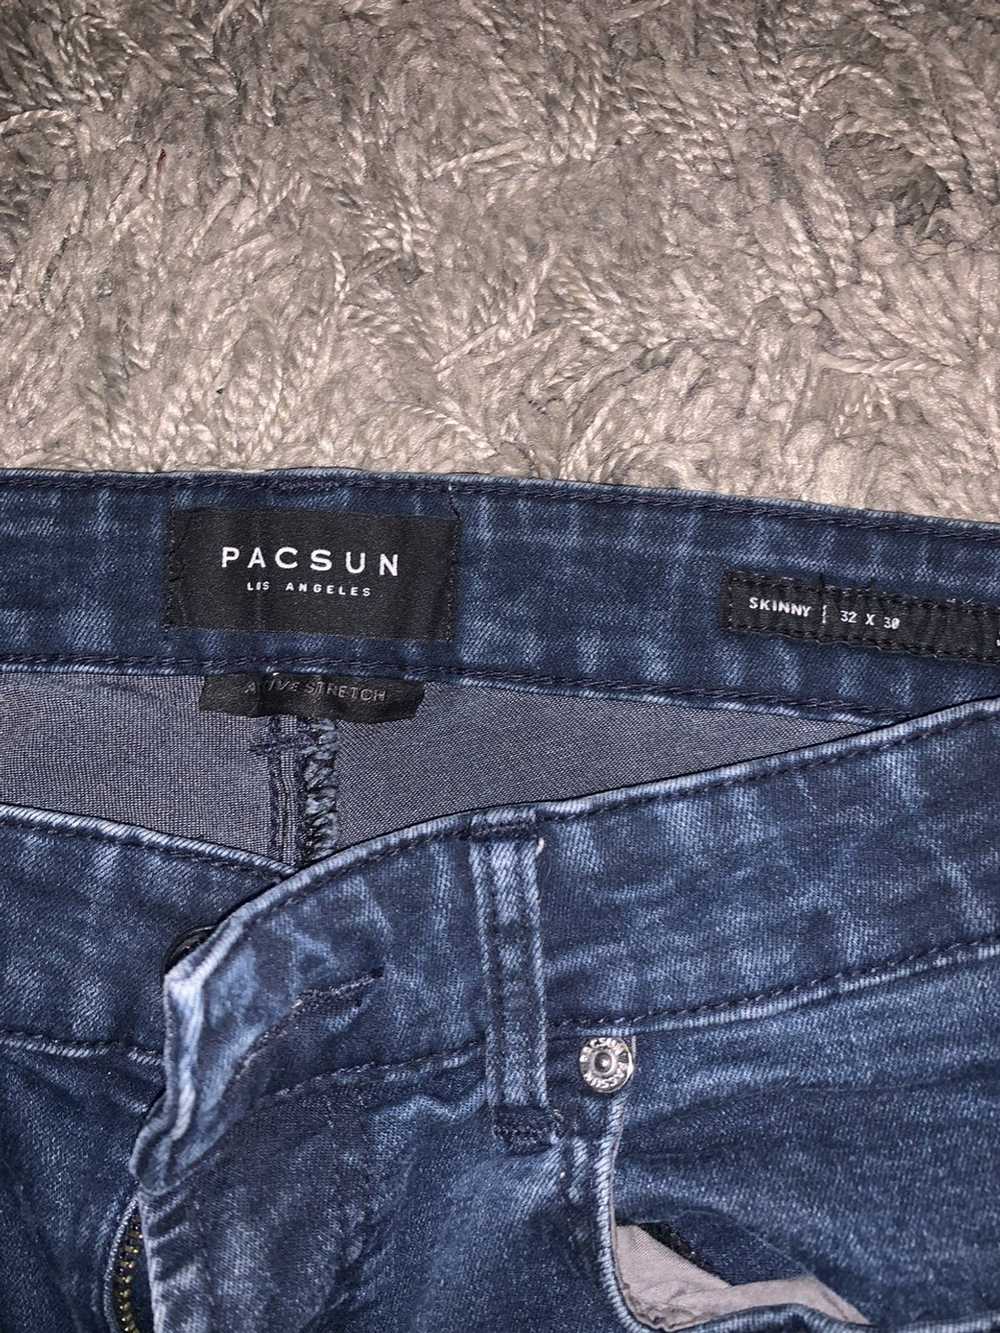 Pacsun Pacsun Active Stretch Skinny Jeans - image 2